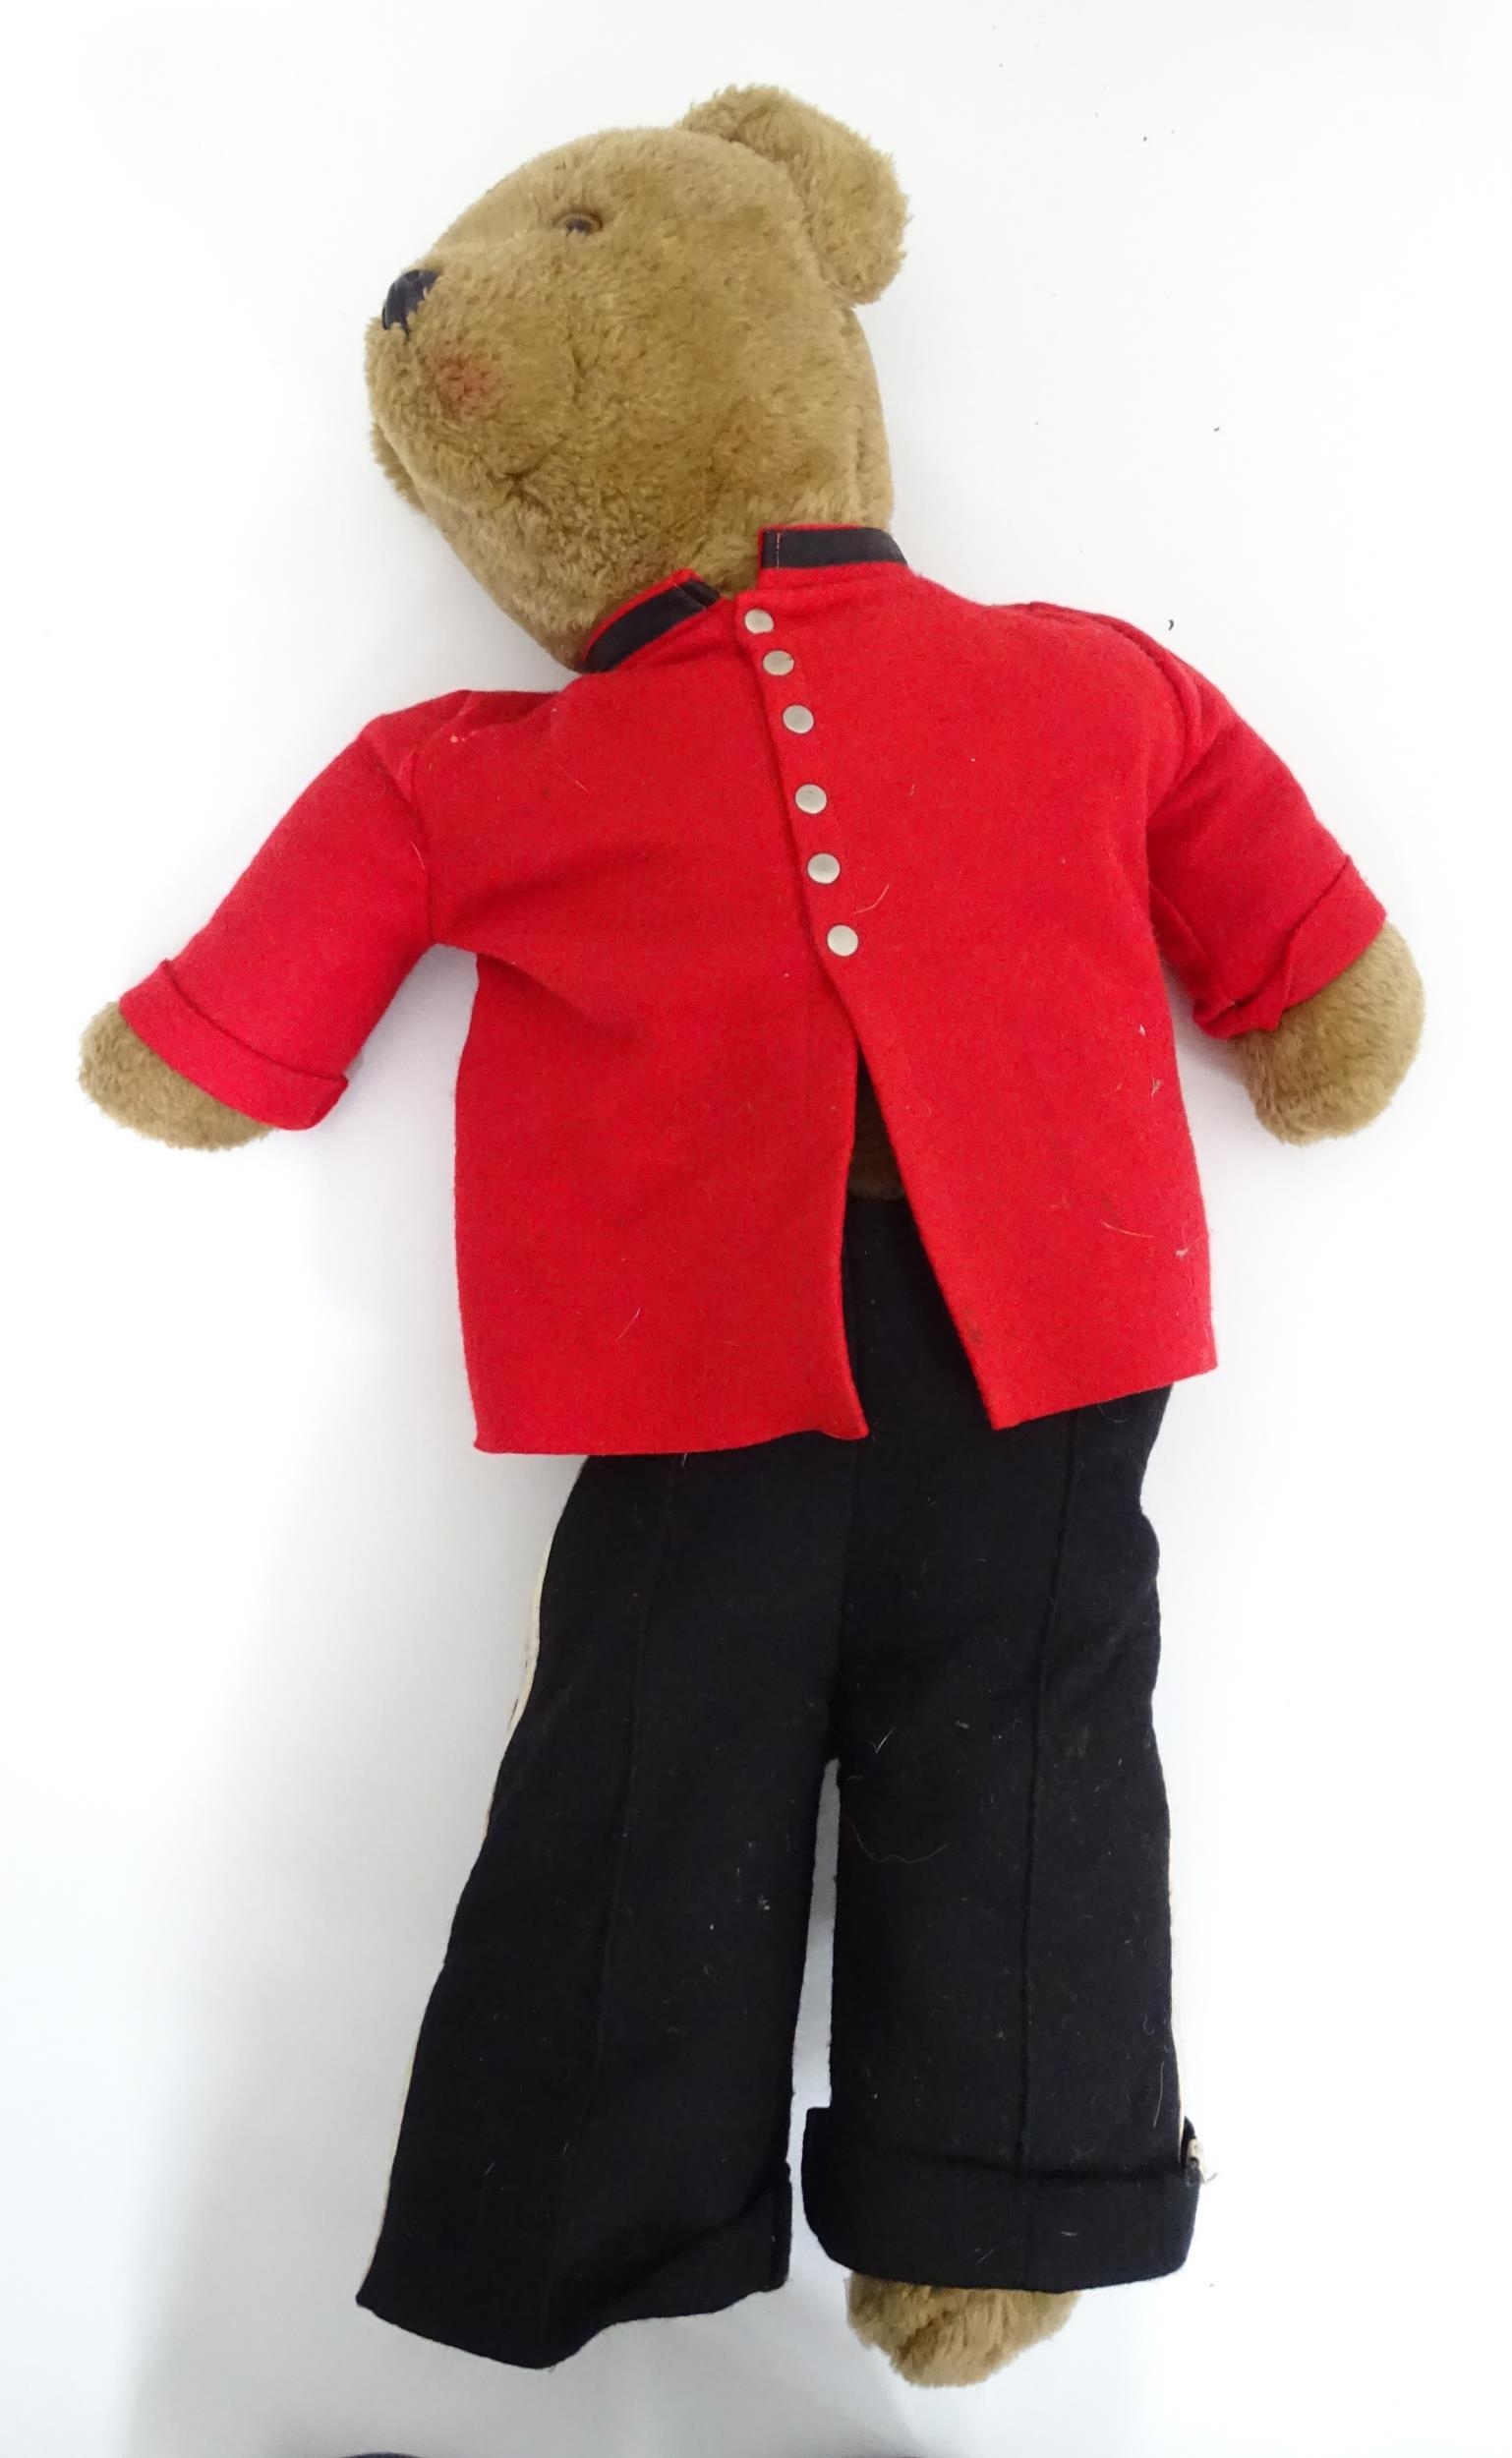 Alresford Crafts Ltd Teddy Bear - dressed as a Chelsea Pensioner Please Note - we do not make - Image 3 of 5